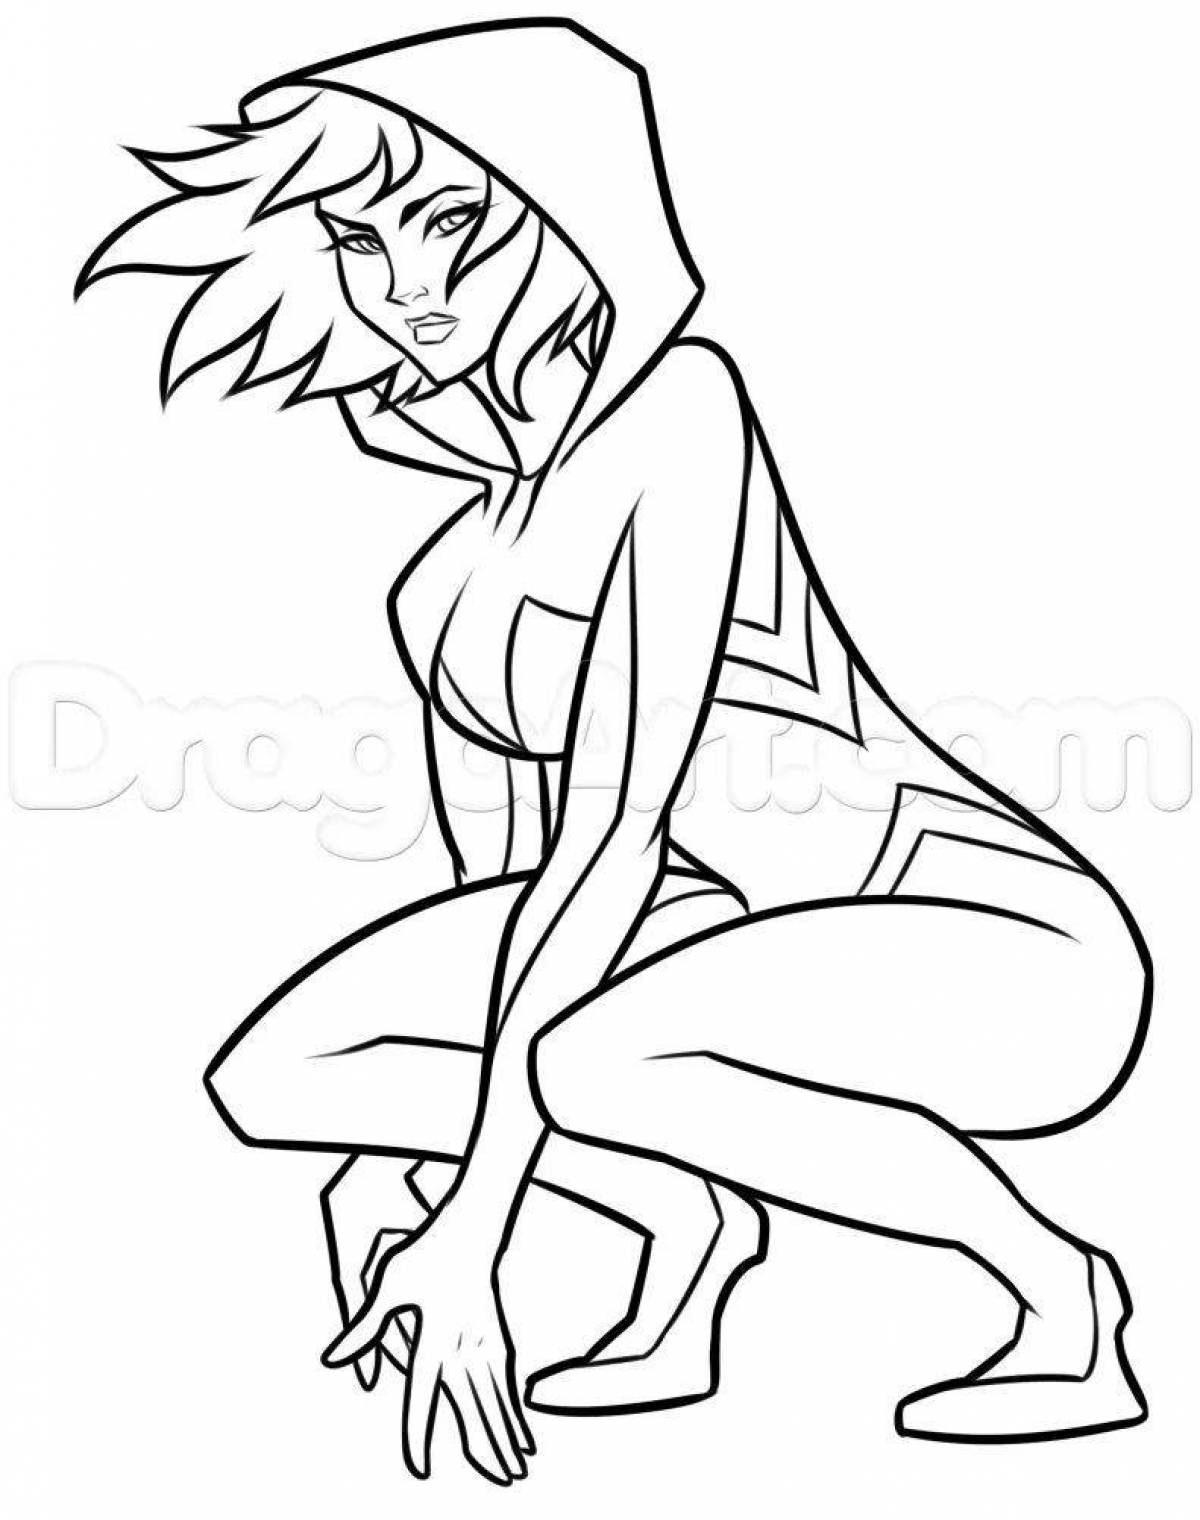 Gwen's adorable coloring page